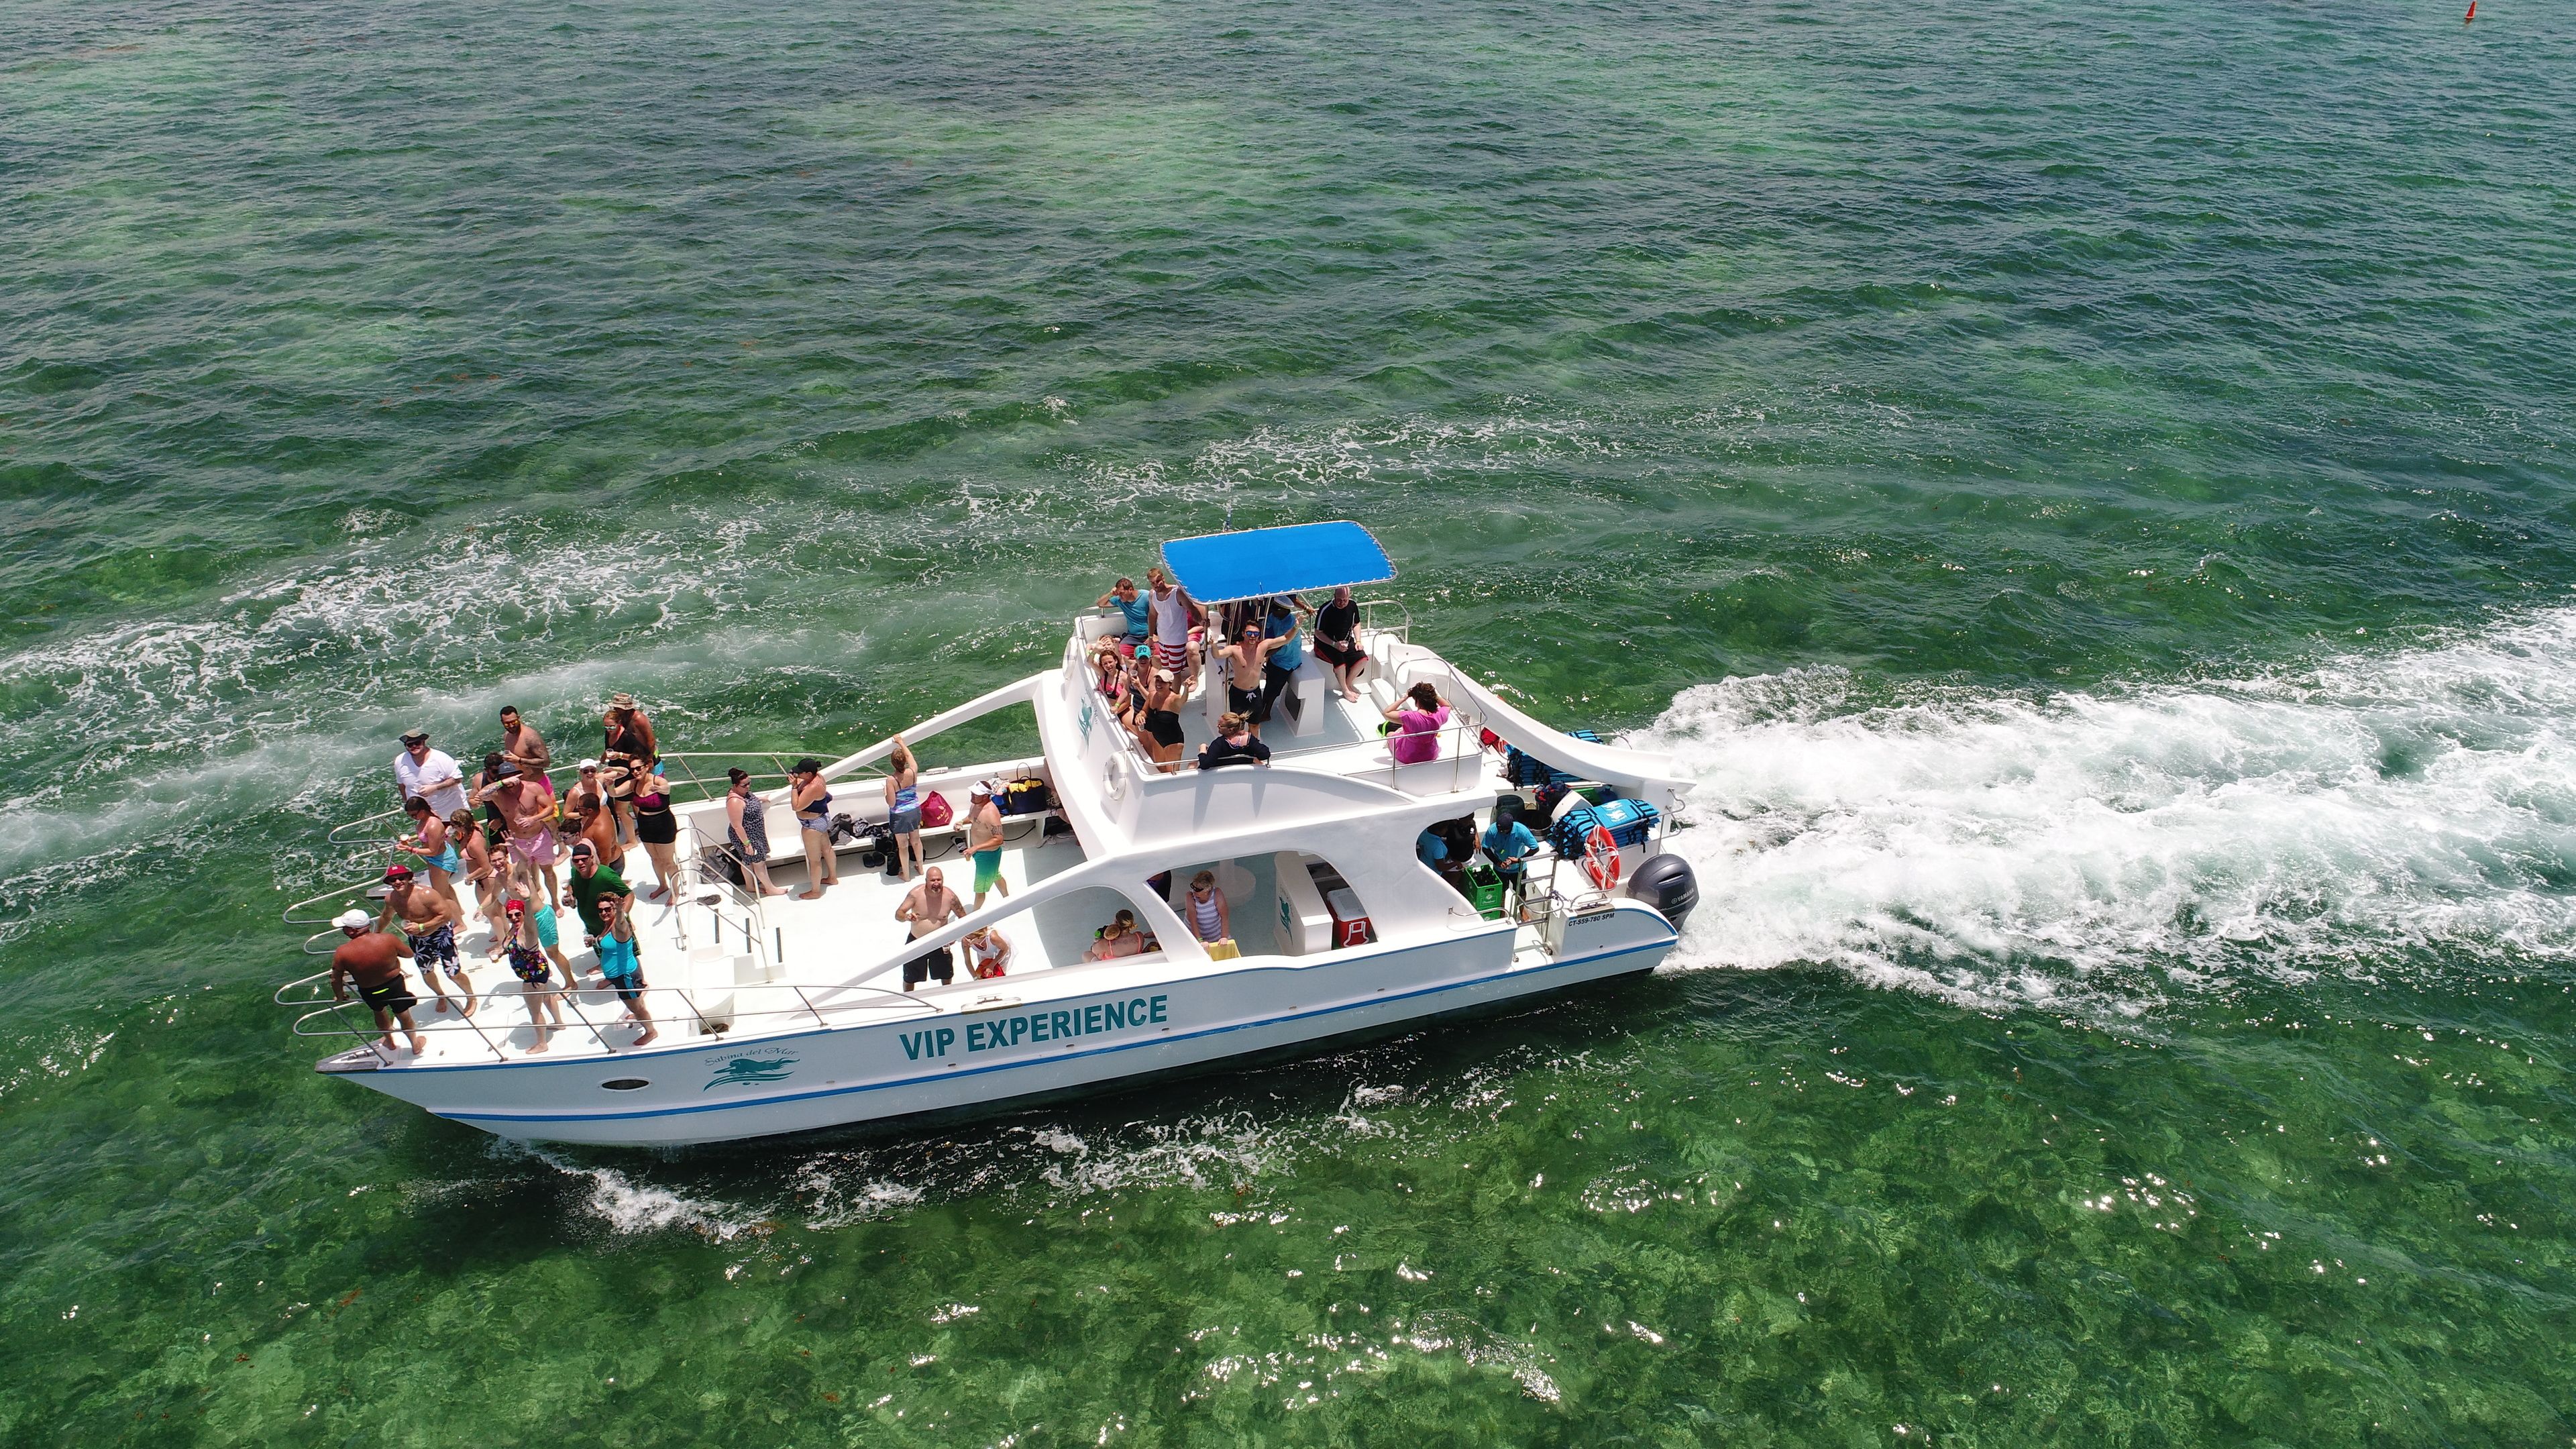 Image of Catamaran VIP Experience Tour with Slide: Aerial view of a group on a catamaran in Punta Cana

